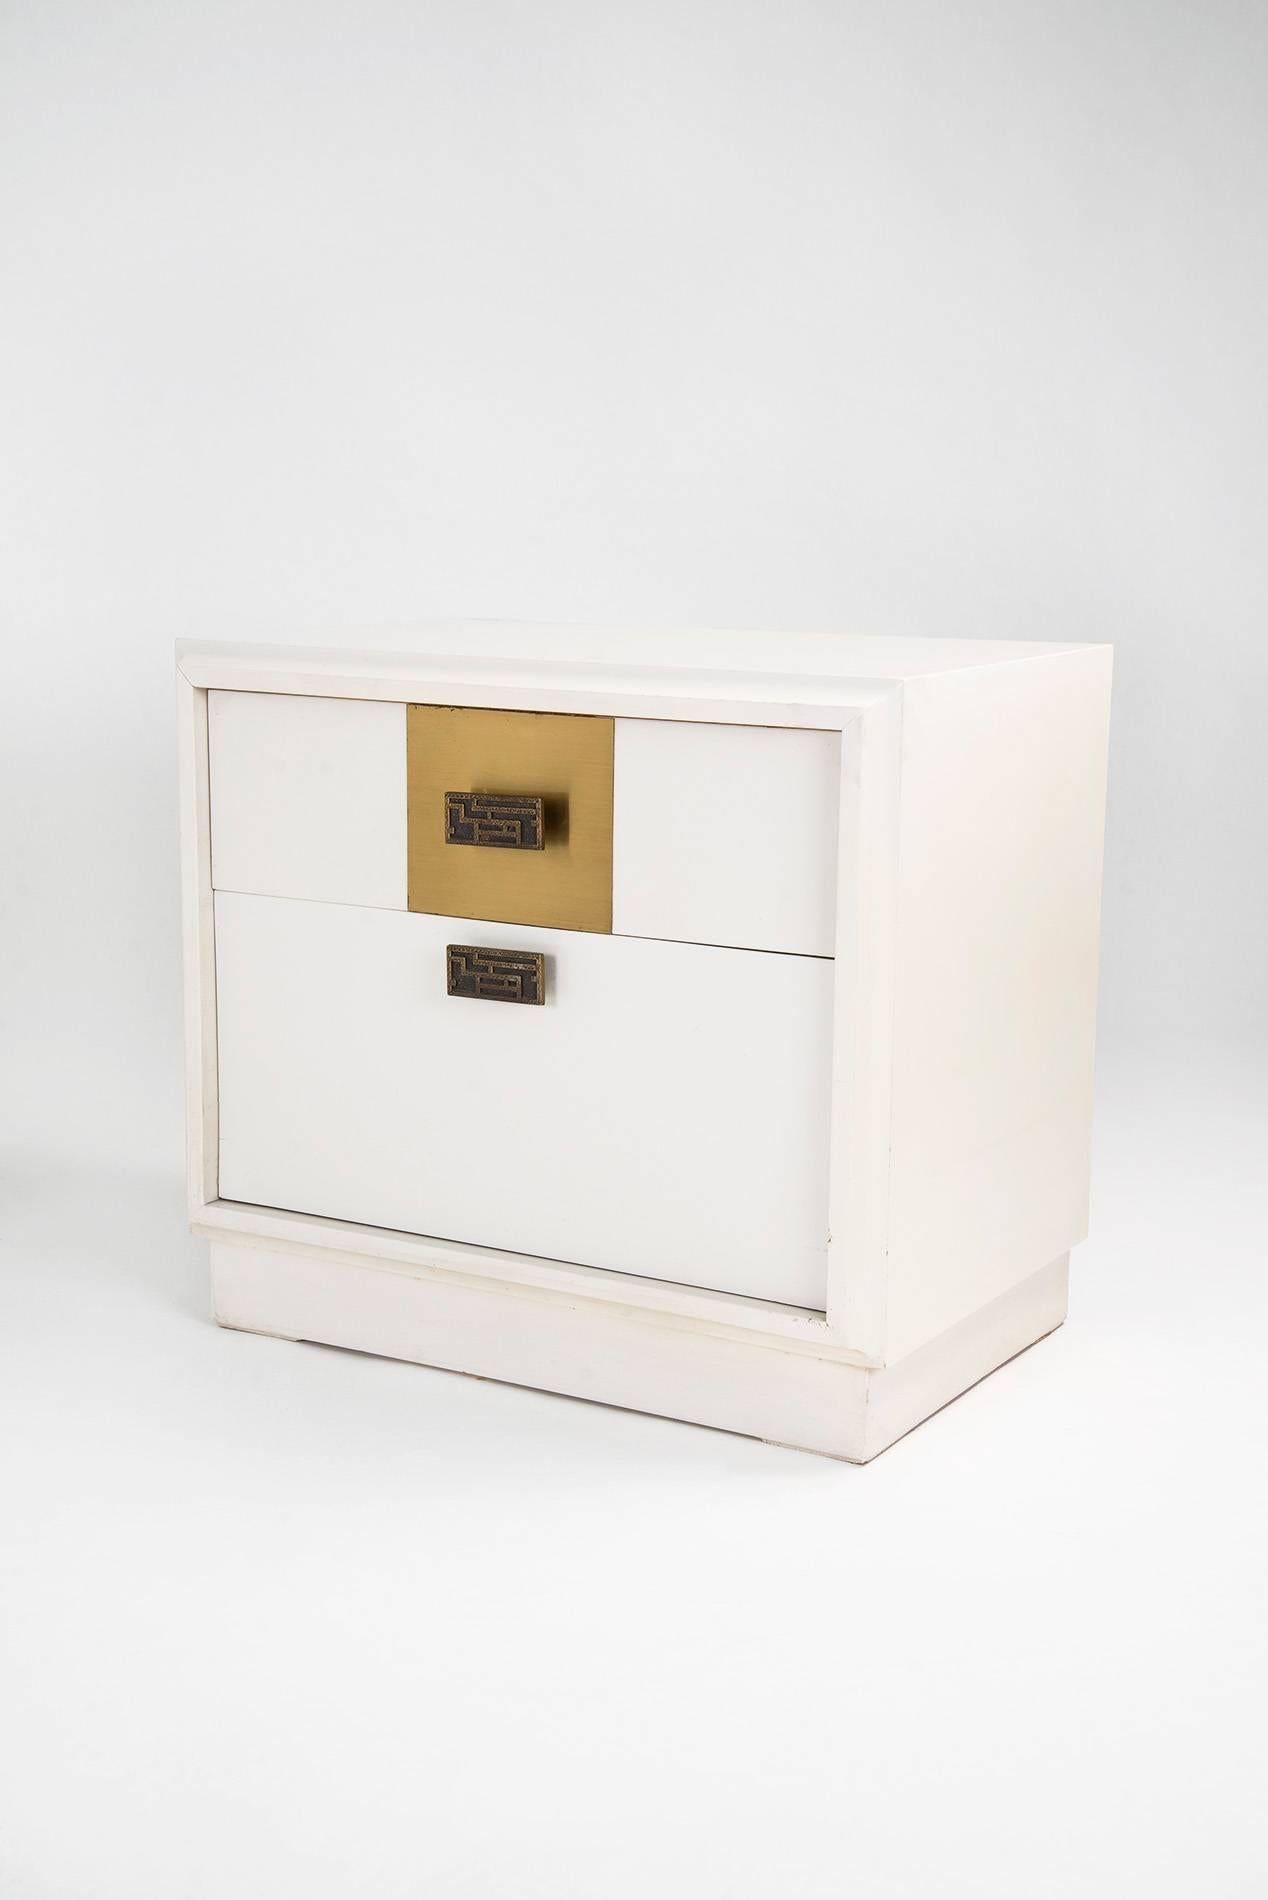 Pair of elegant nightstands designed by Luciano Frigerio for Frigerio in the 1970s. White lacquered wooden structure, brass decorations, bronze handles. Good original vintage conditions.